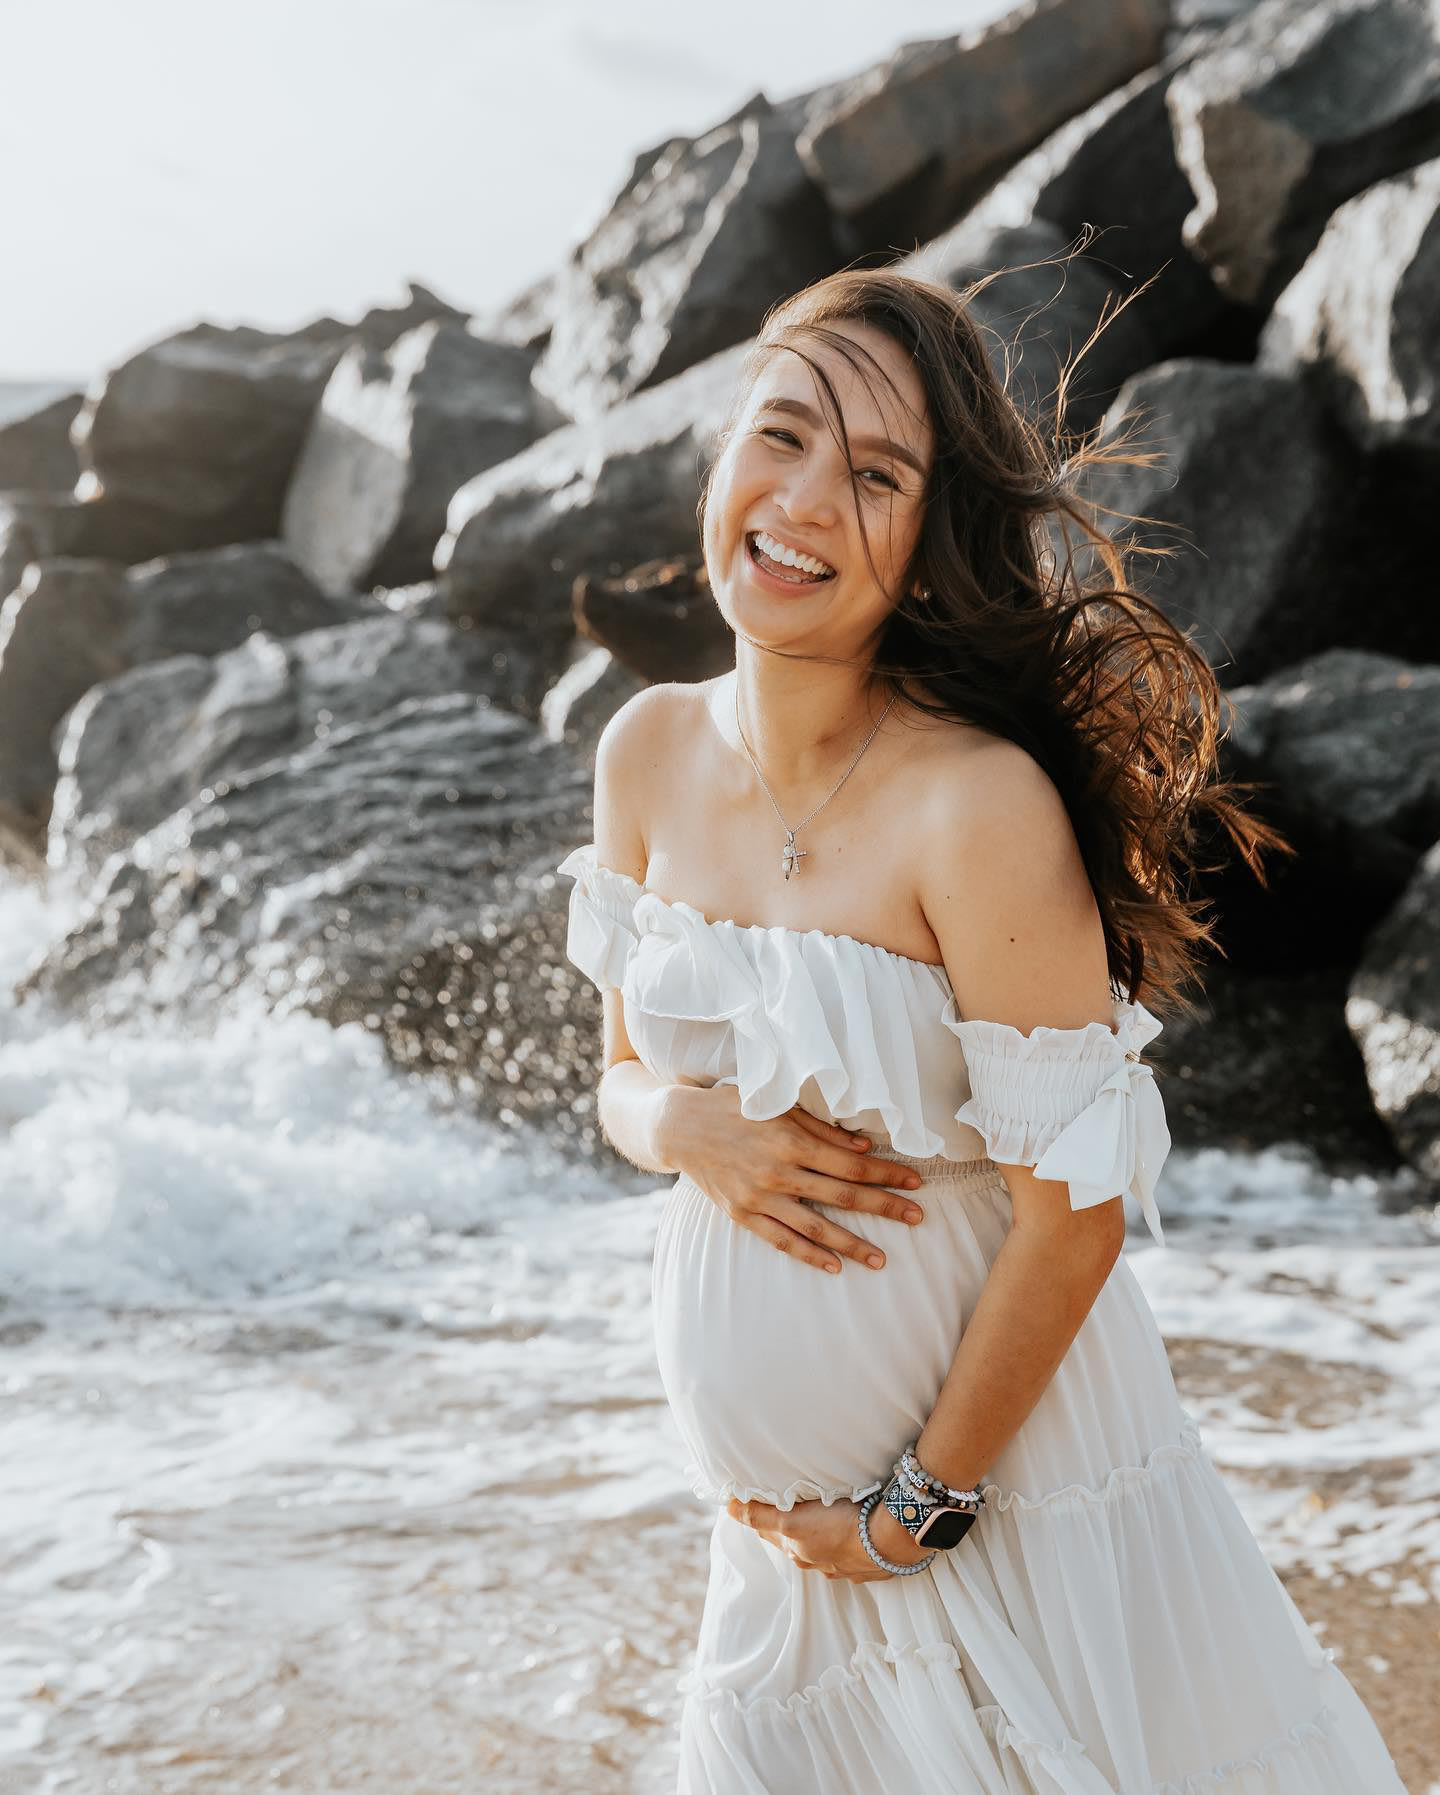 What To Wear For Beach Maternity Photos